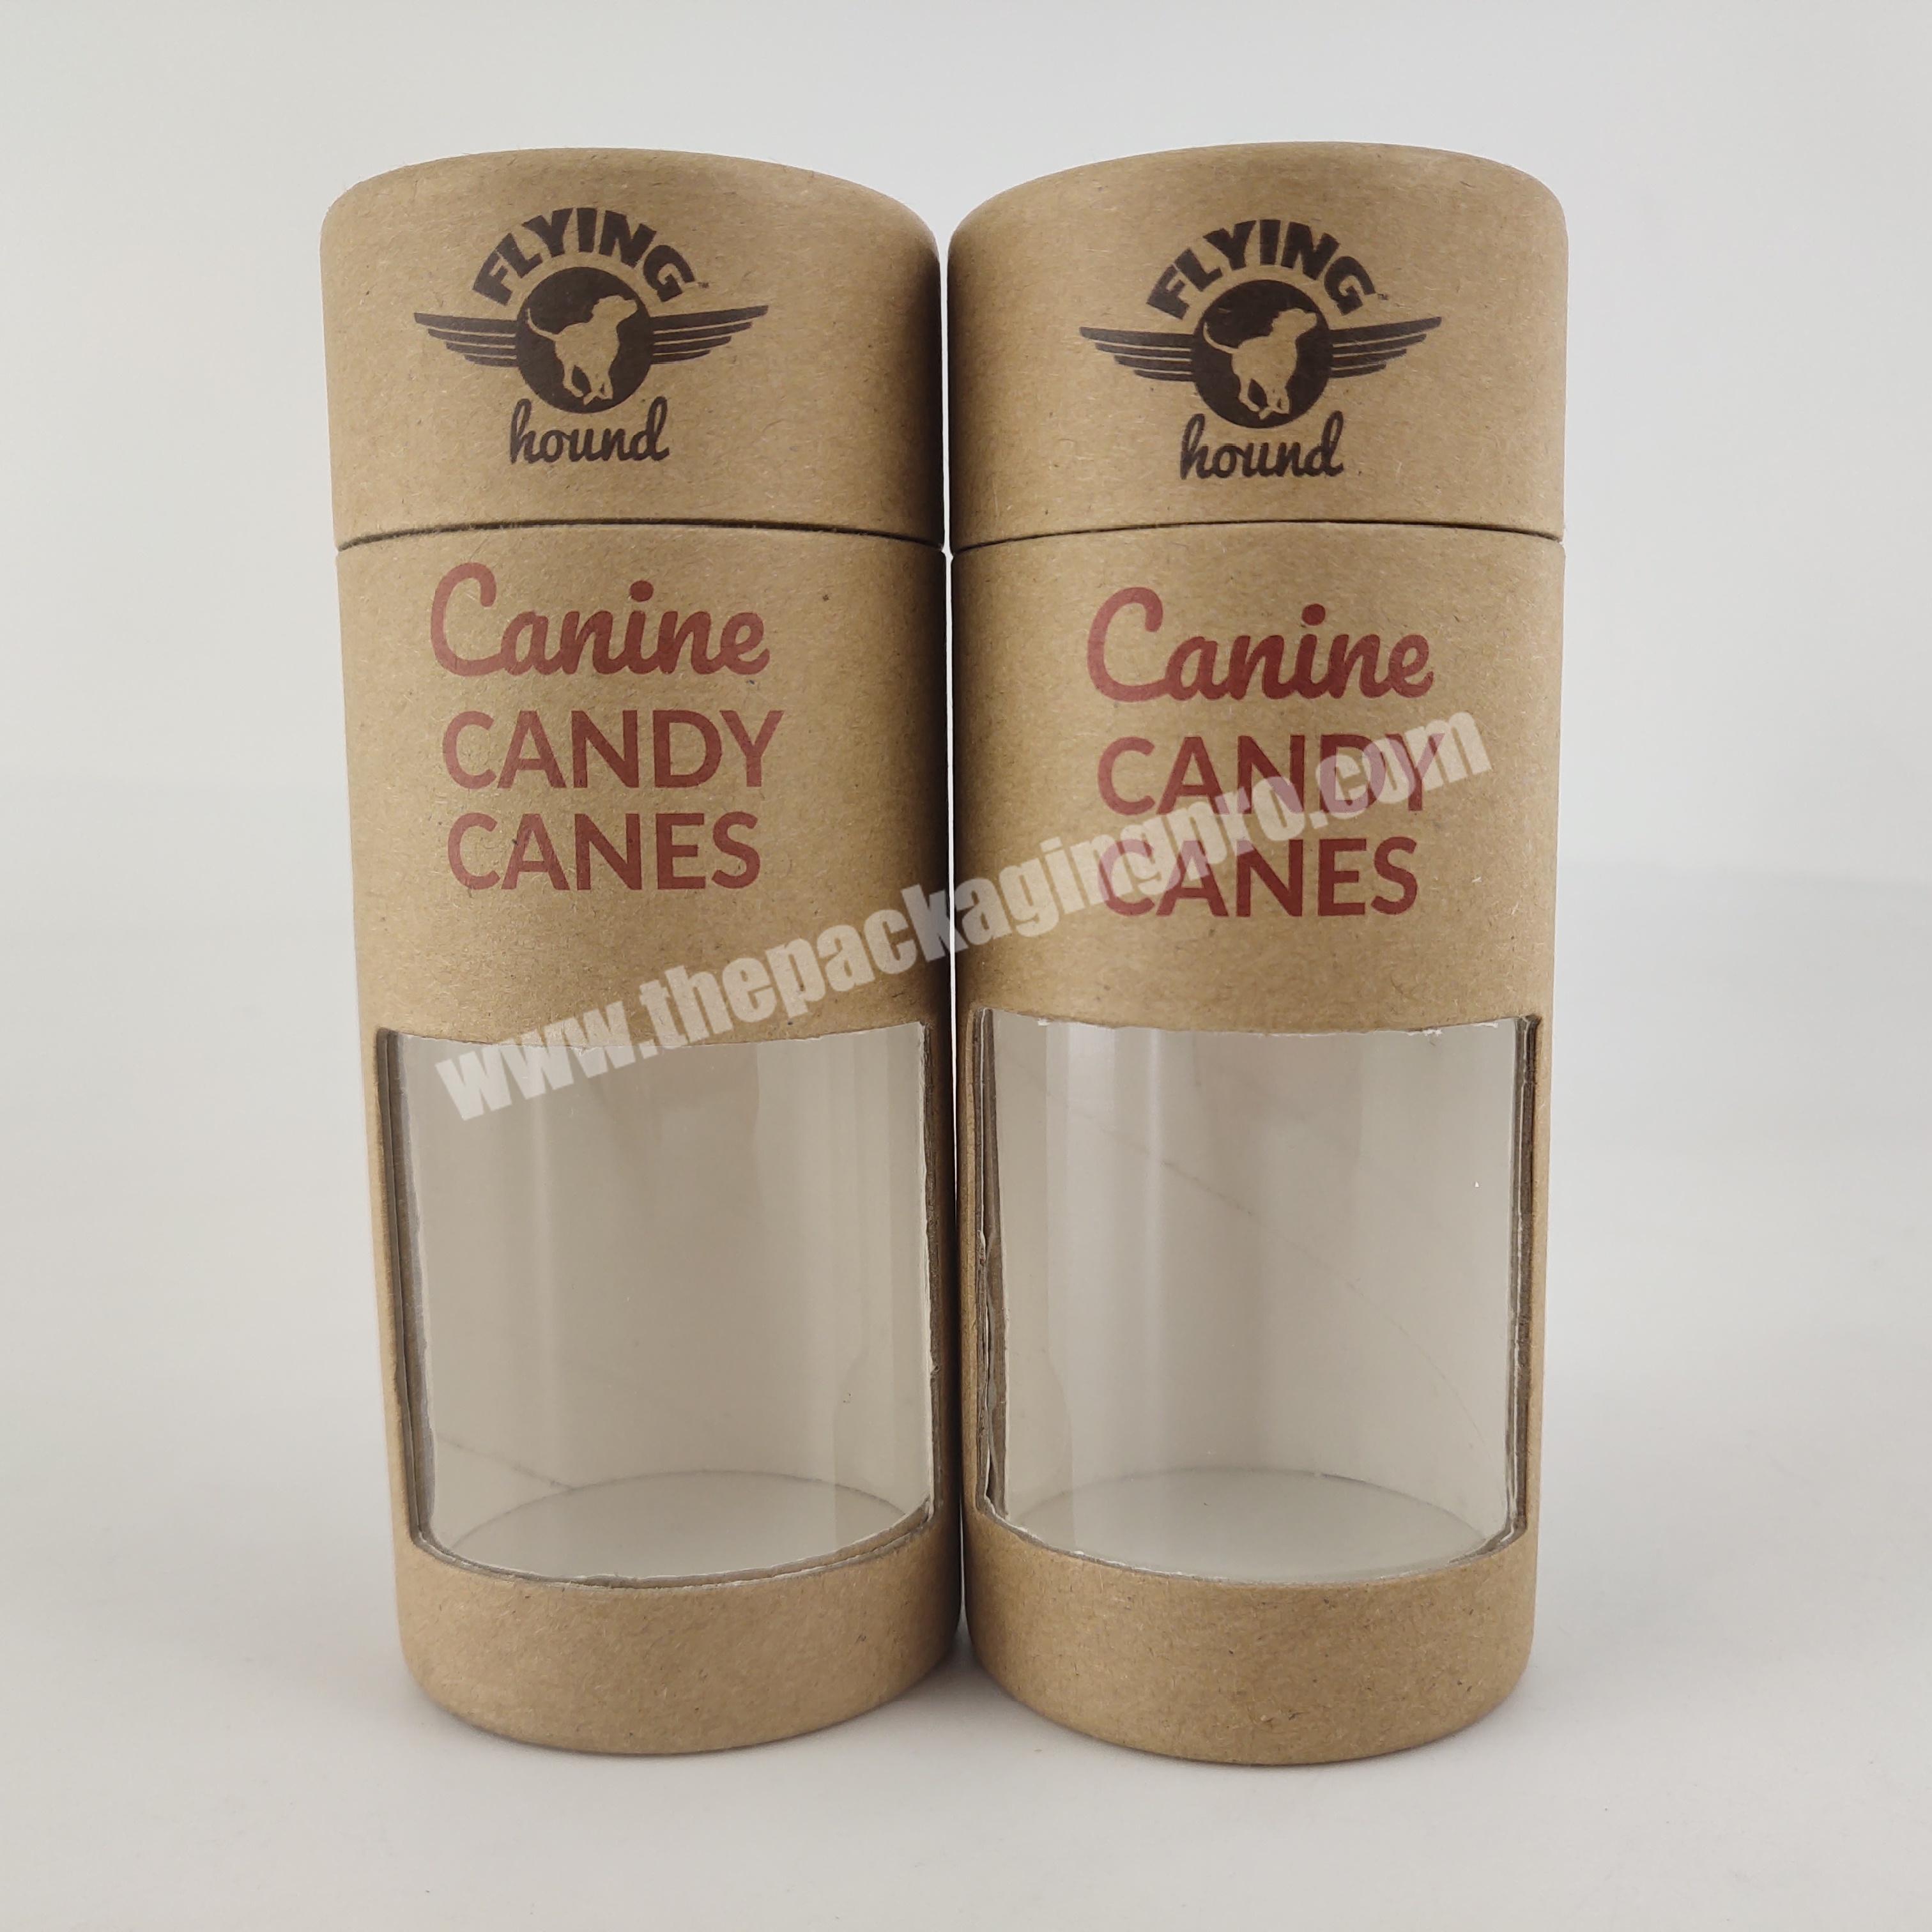 cardboard packaging tube with window for gift